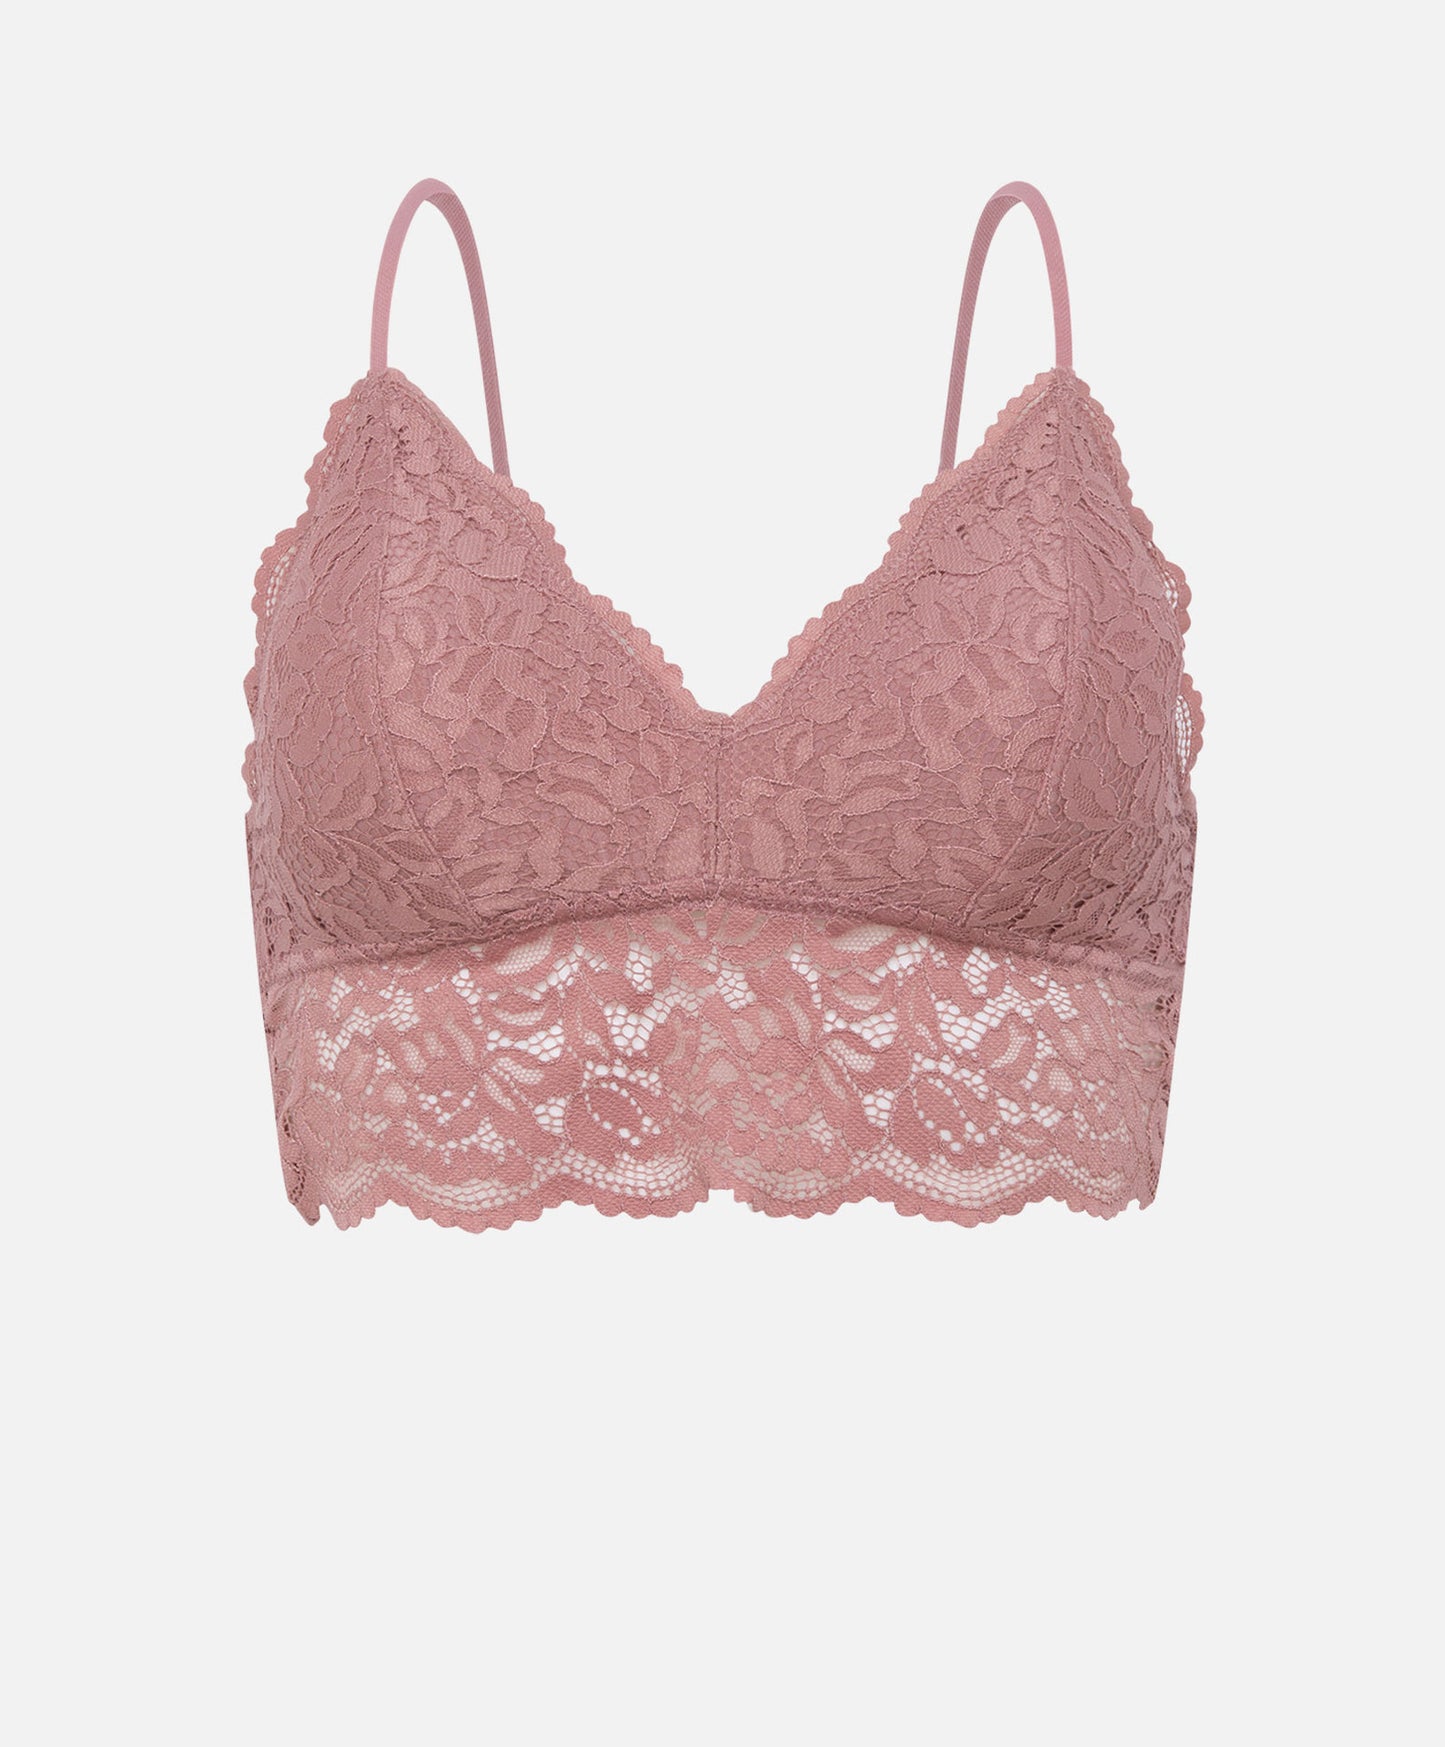 Wearing Like No Wearing Triangle Lace Floral Comfy Sweet Bralette